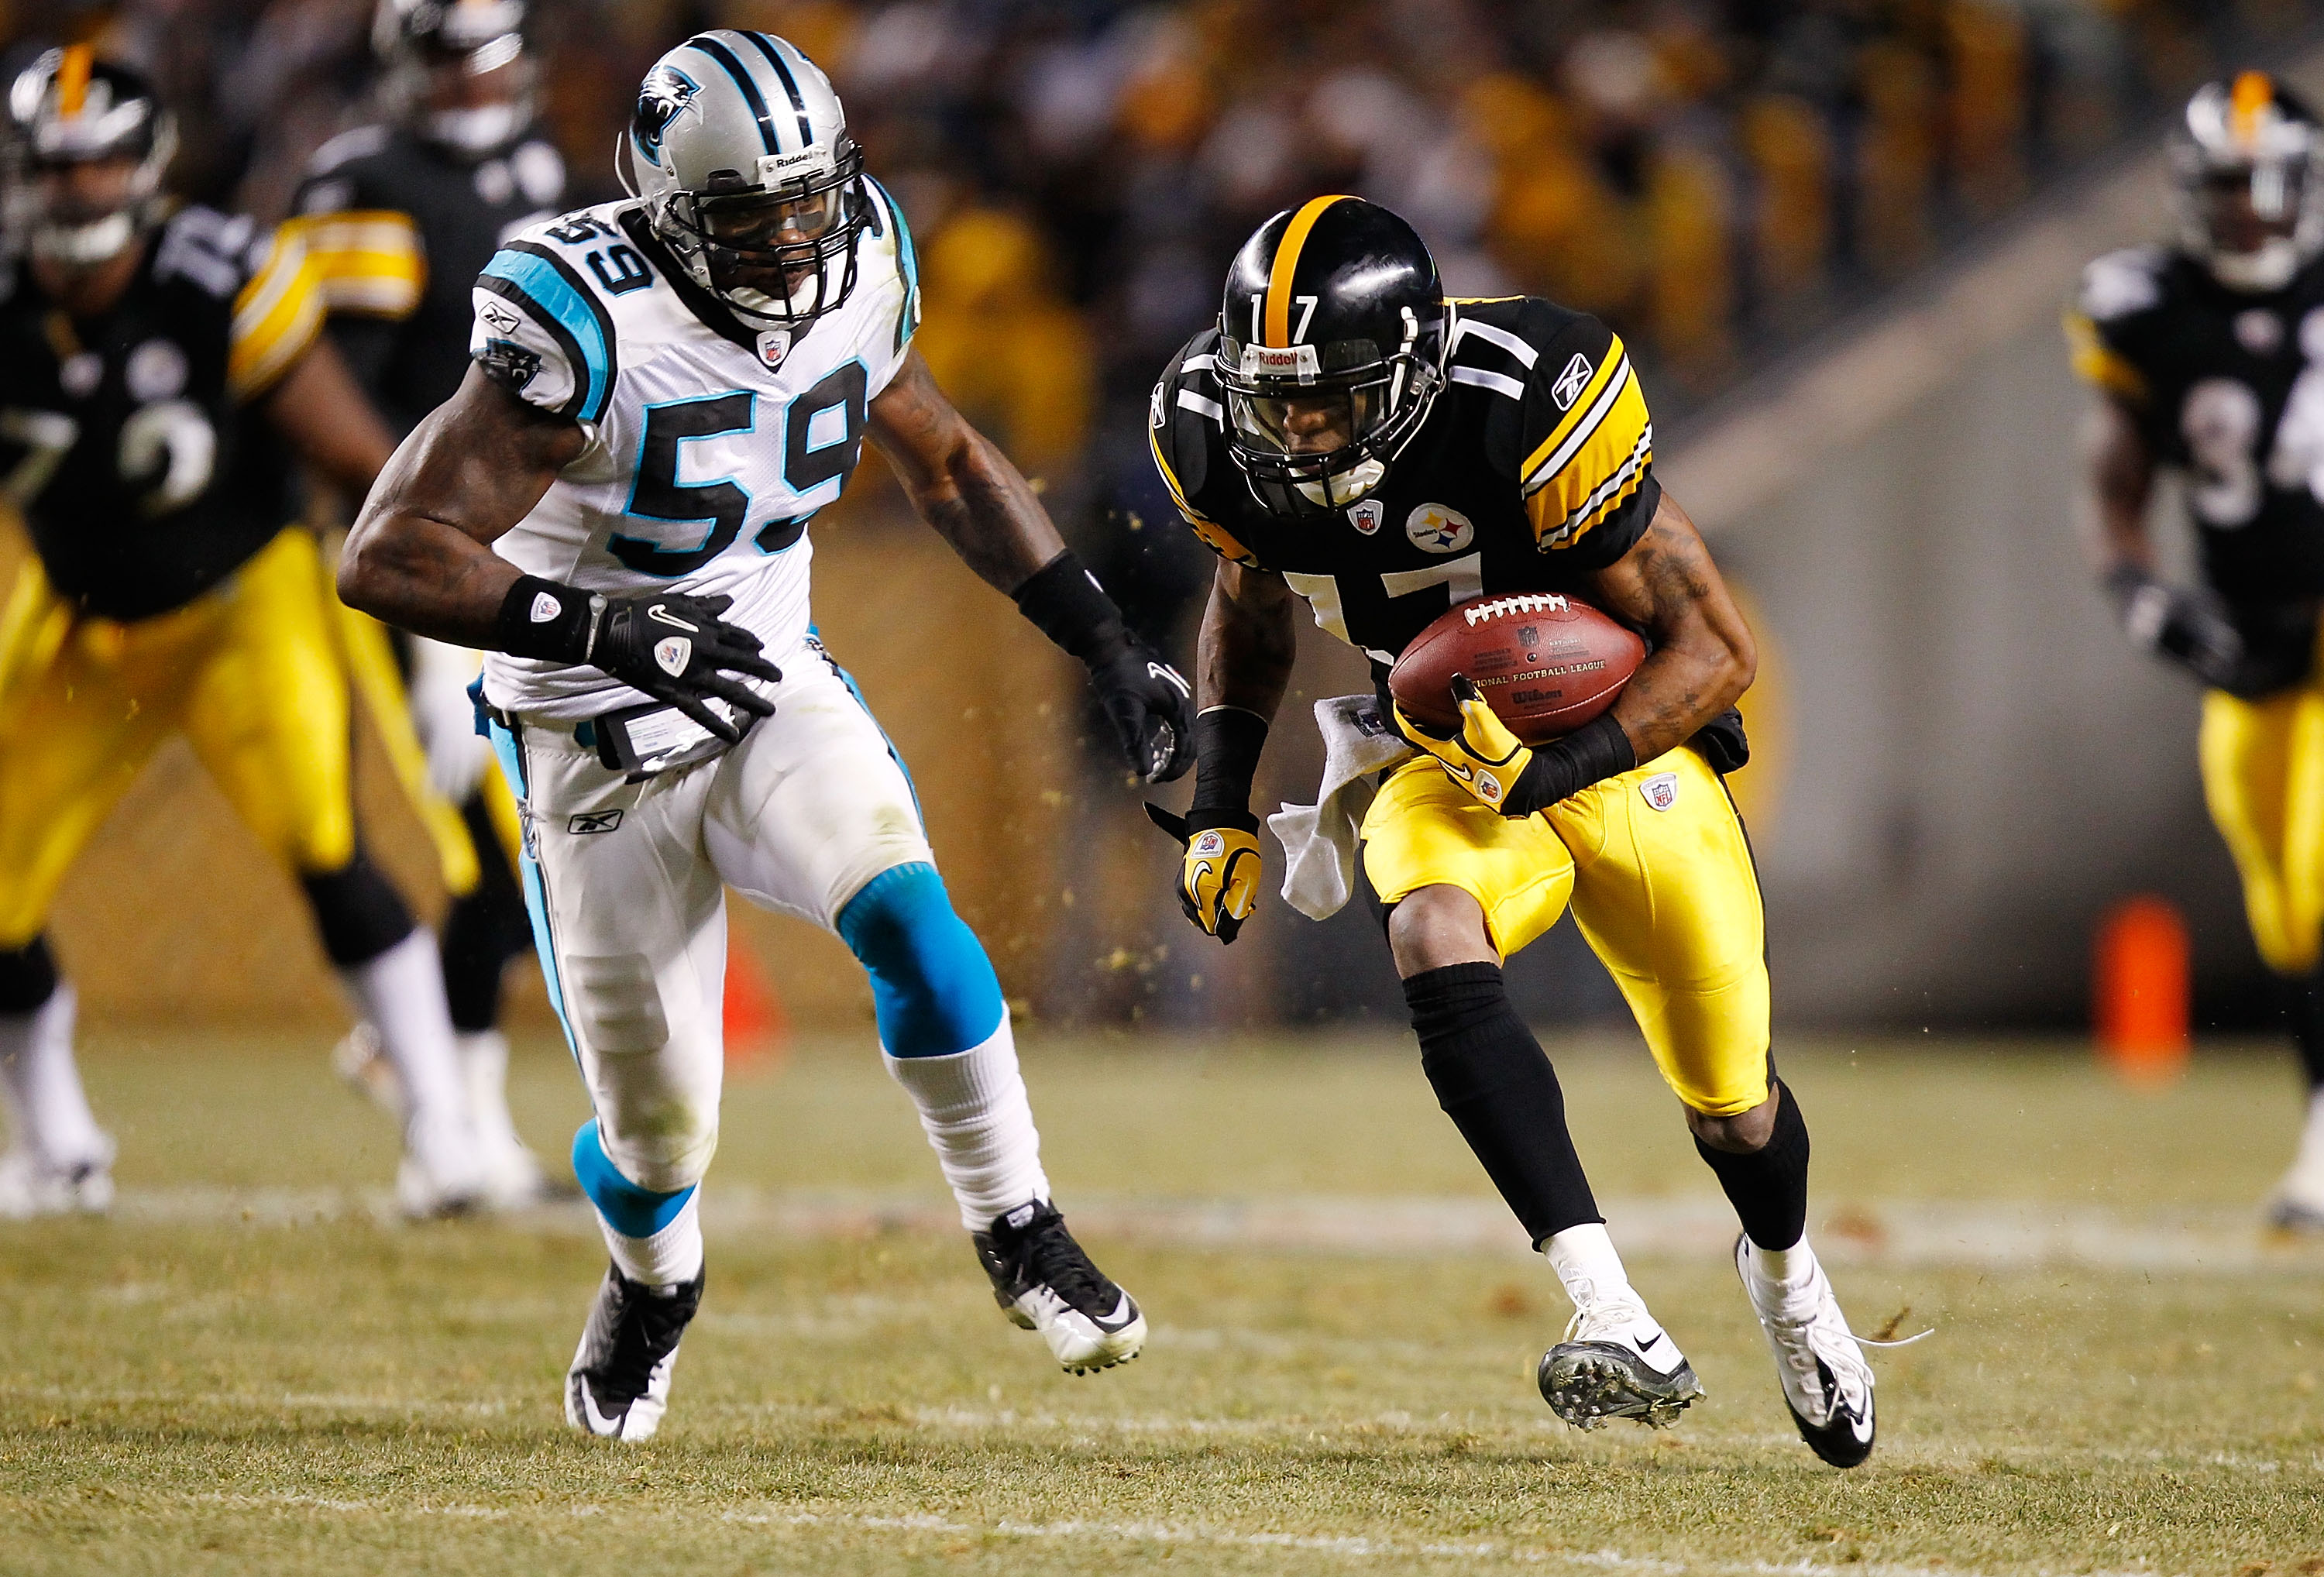 PITTSBURGH - DECEMBER 23:  Mike Wallace #17 of the Pittsburgh Steelers runs by Nic Harris #59 of the Carolina Panthers before scoring a touchdown during the game on December 23, 2010 at Heinz Field in Pittsburgh, Pennsylvania.  (Photo by Jared Wickerham/G